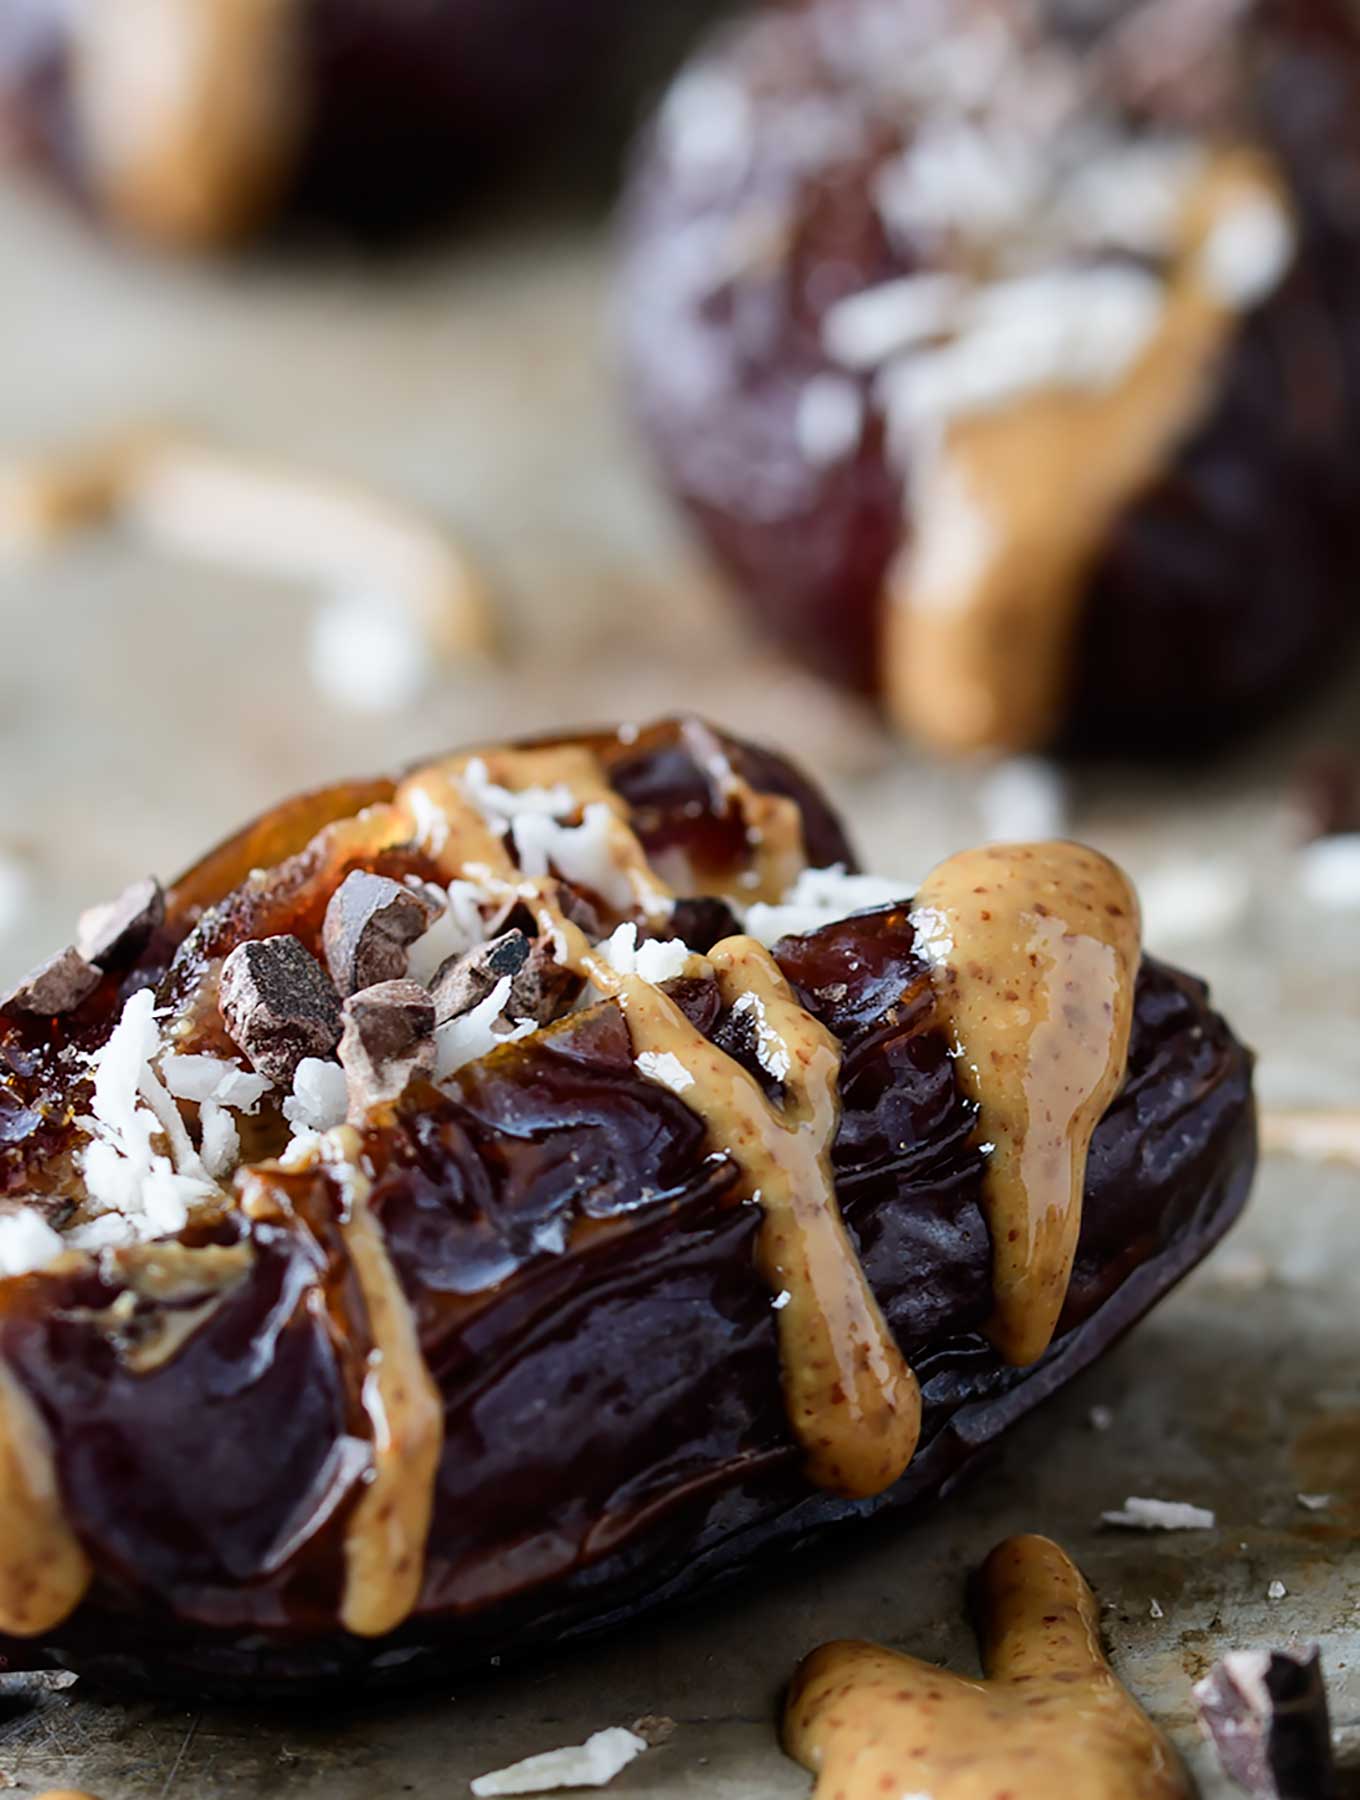 Dates stuffed with almond butter, coconut, cacao nibs and smoked salt.